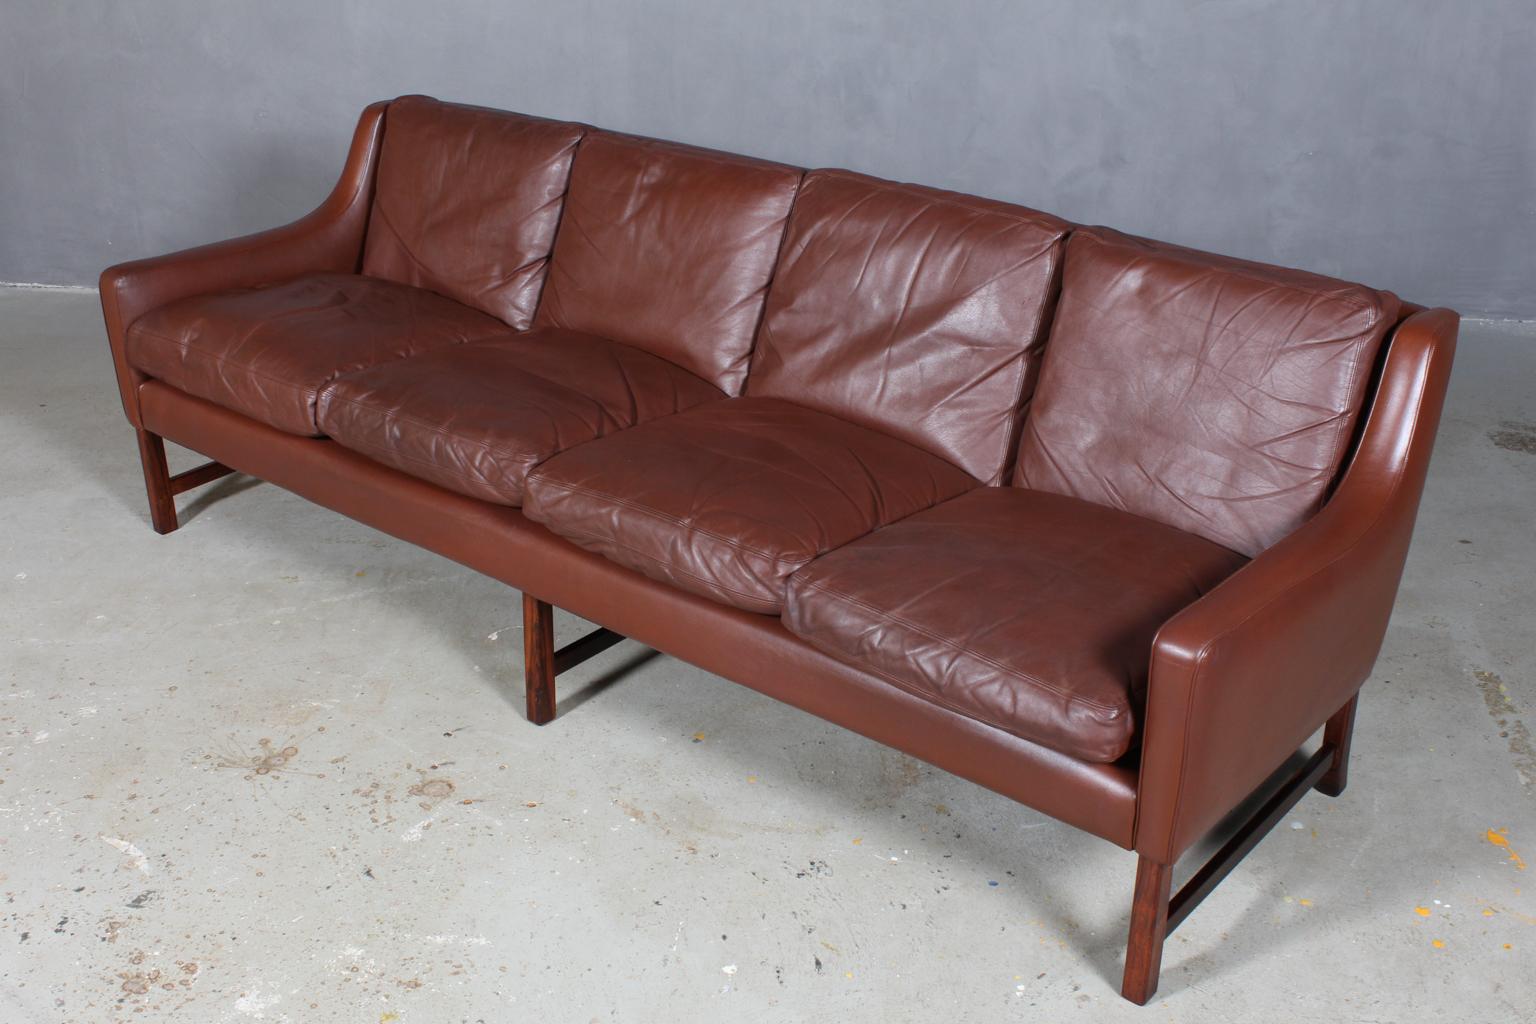 Fredrik Kayser four-seat sofa original upholstered with brown leather.

Legs of rosewood.

Model 965T, made by Vatne Møbelfabrik.